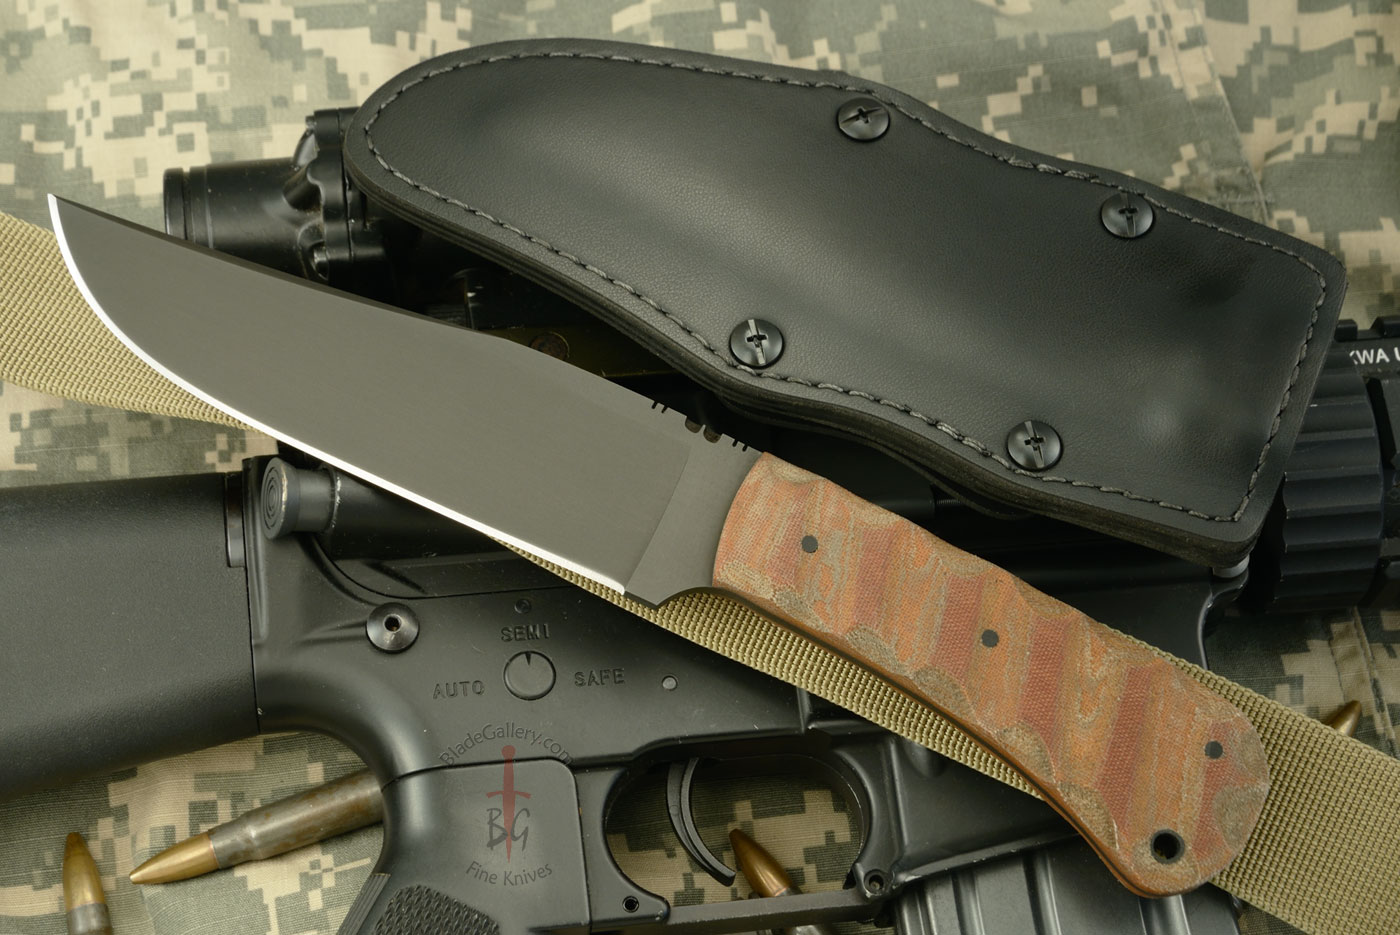 Field Knife with Sculted Tan Micarta